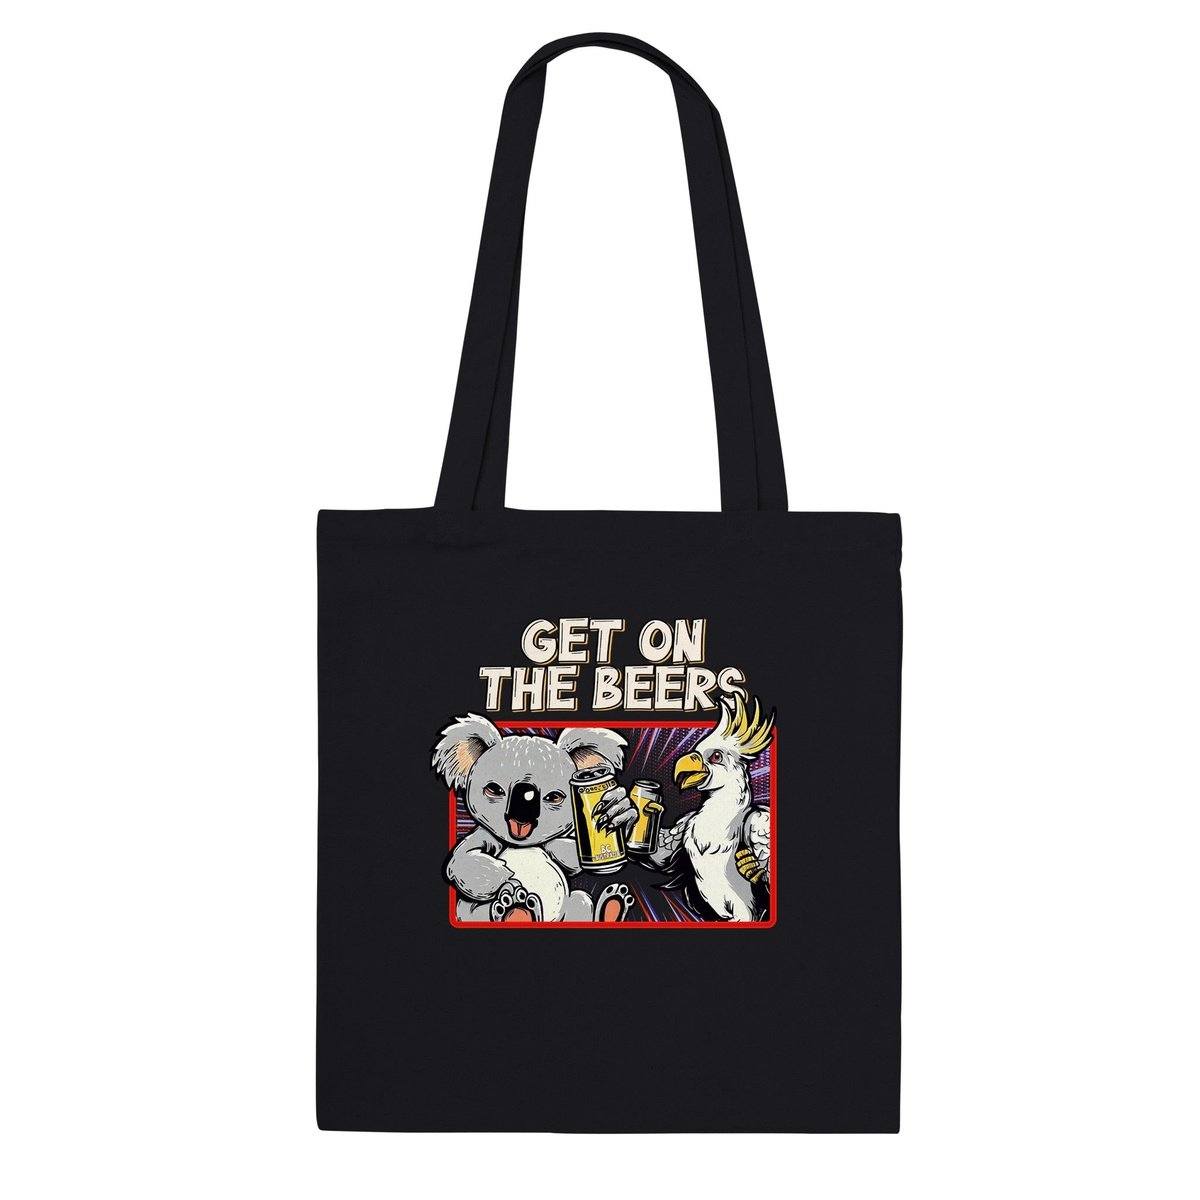 Get On The Beers  - Classic Tote Bag Australia Online Color Black